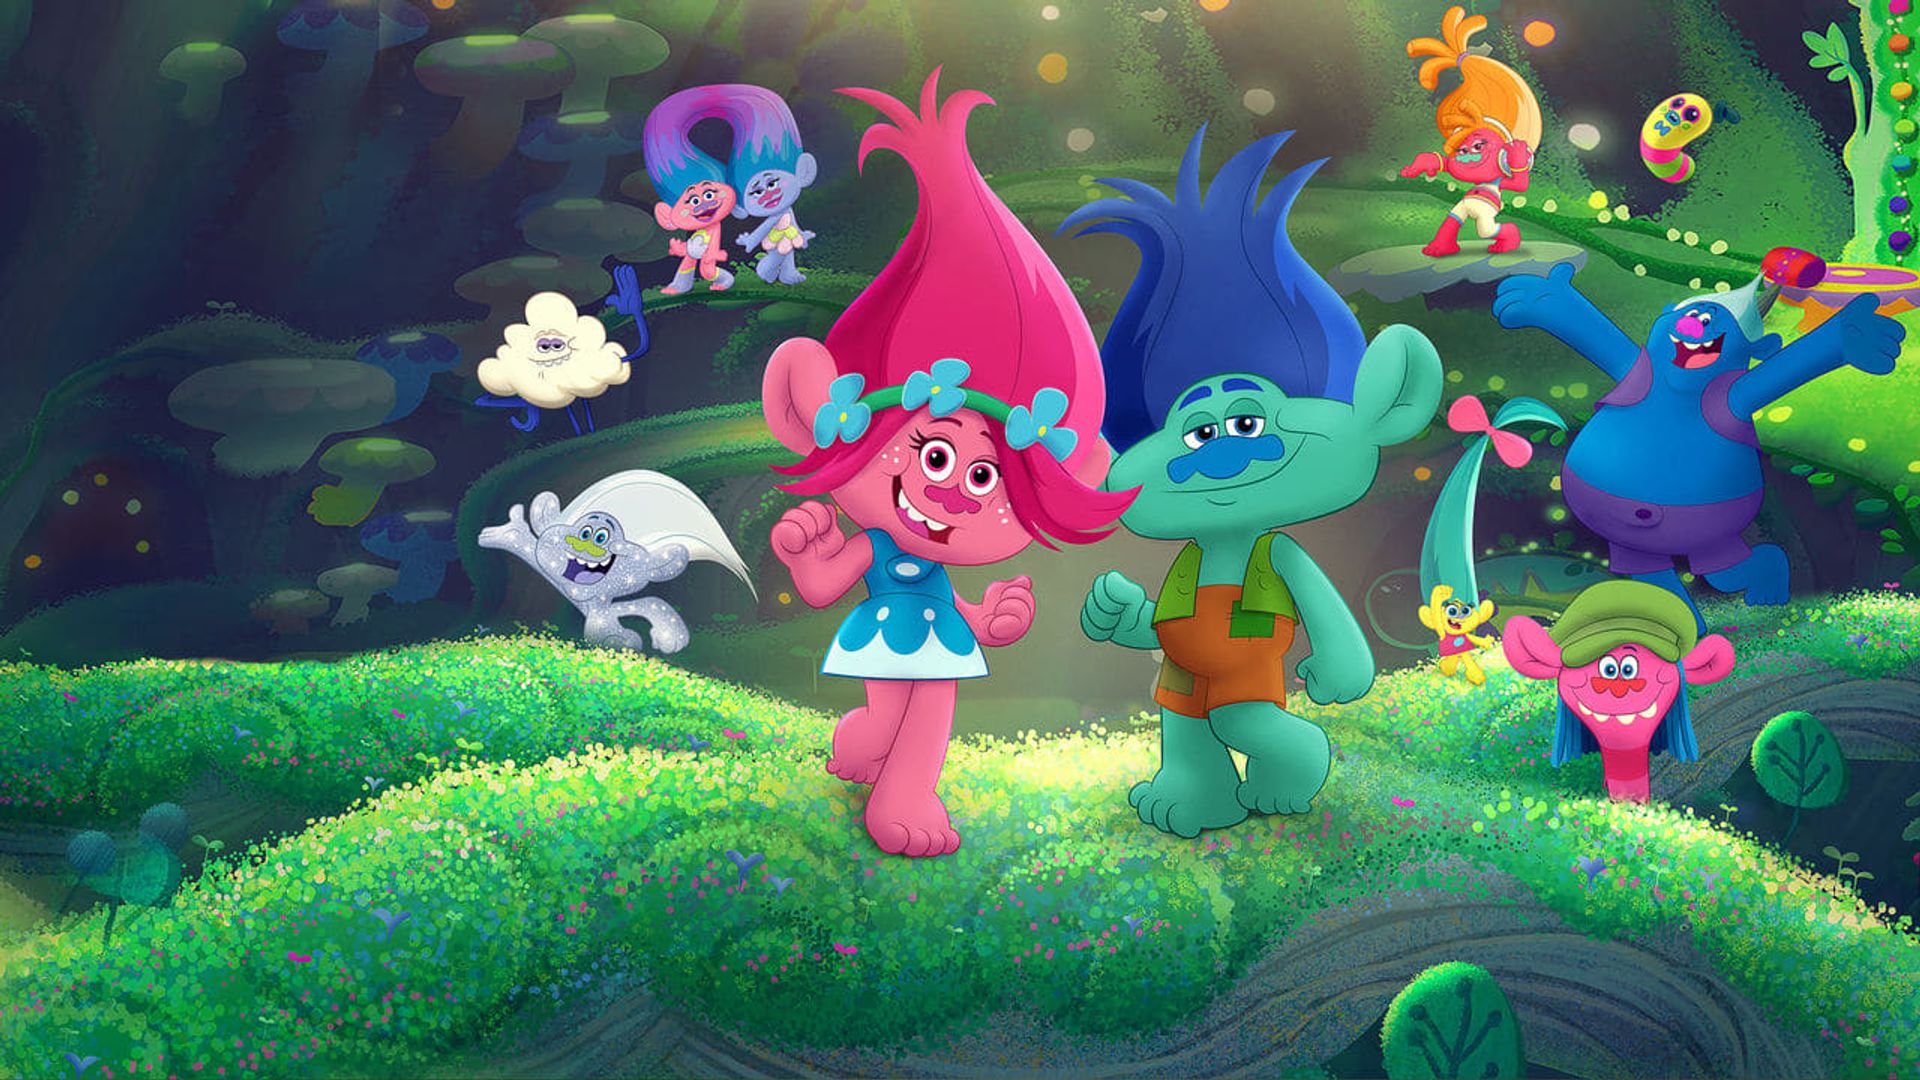 Trolls: The Beat Goes On! background